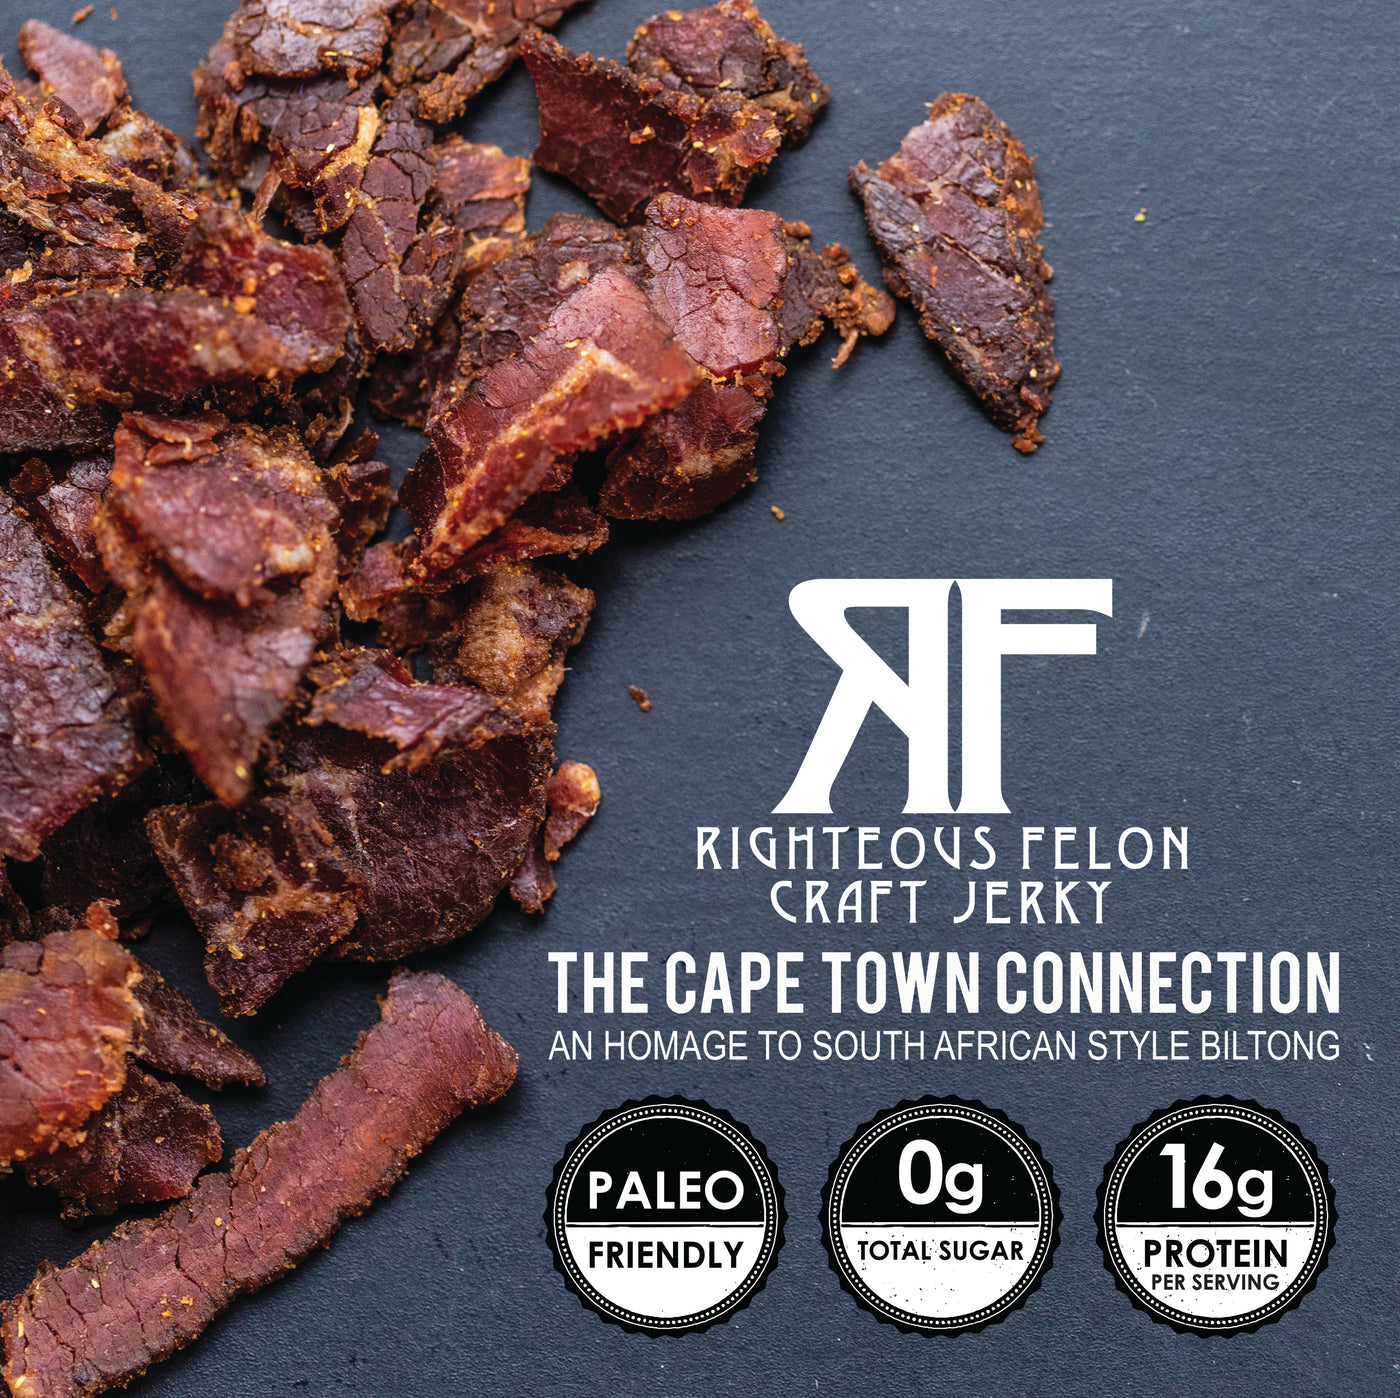 The Cape Town Connection - an homage to South African style biltong. Paleo friendly, 0g total sugar, 16g protein per serving